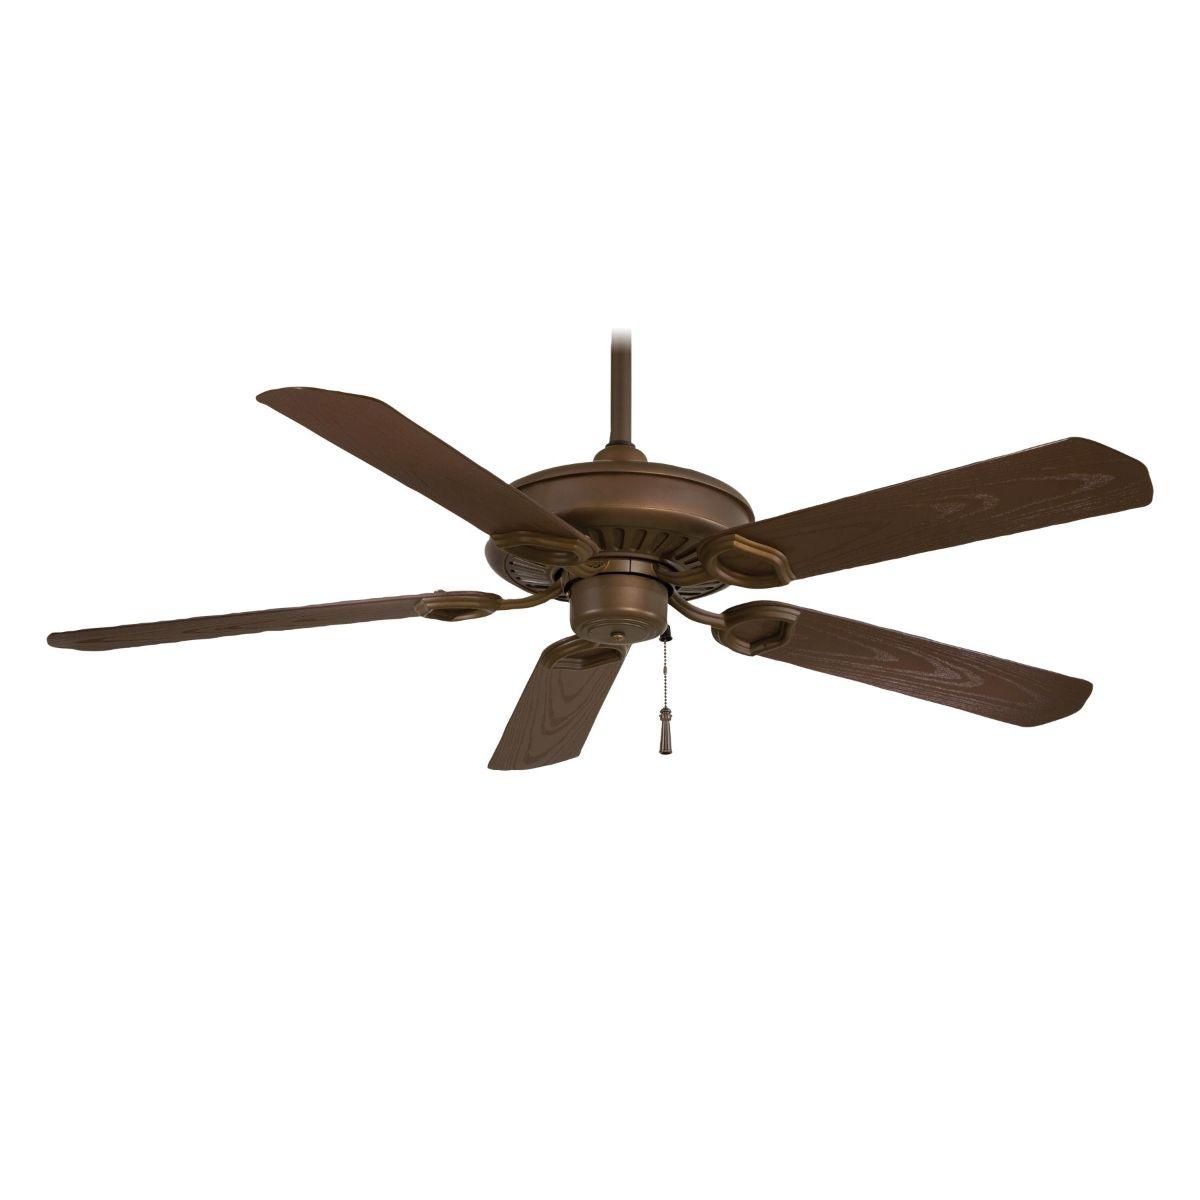 Sundowner 54 Inch Outdoor Ceiling Fan With Pull Chain